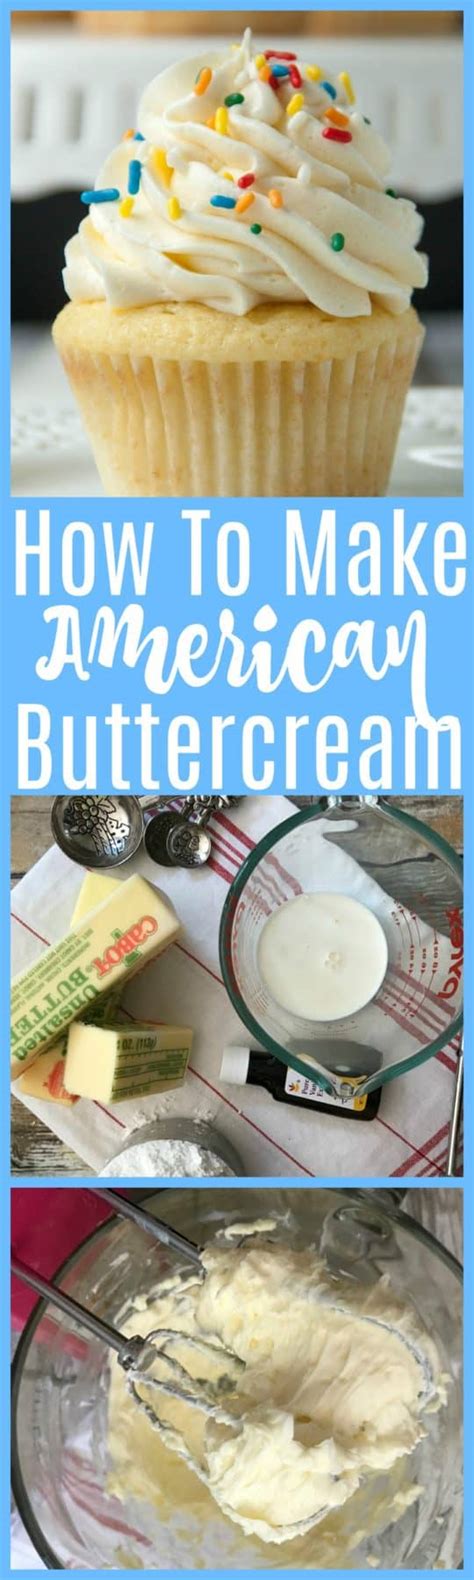 the best buttercream icing that you will ever find